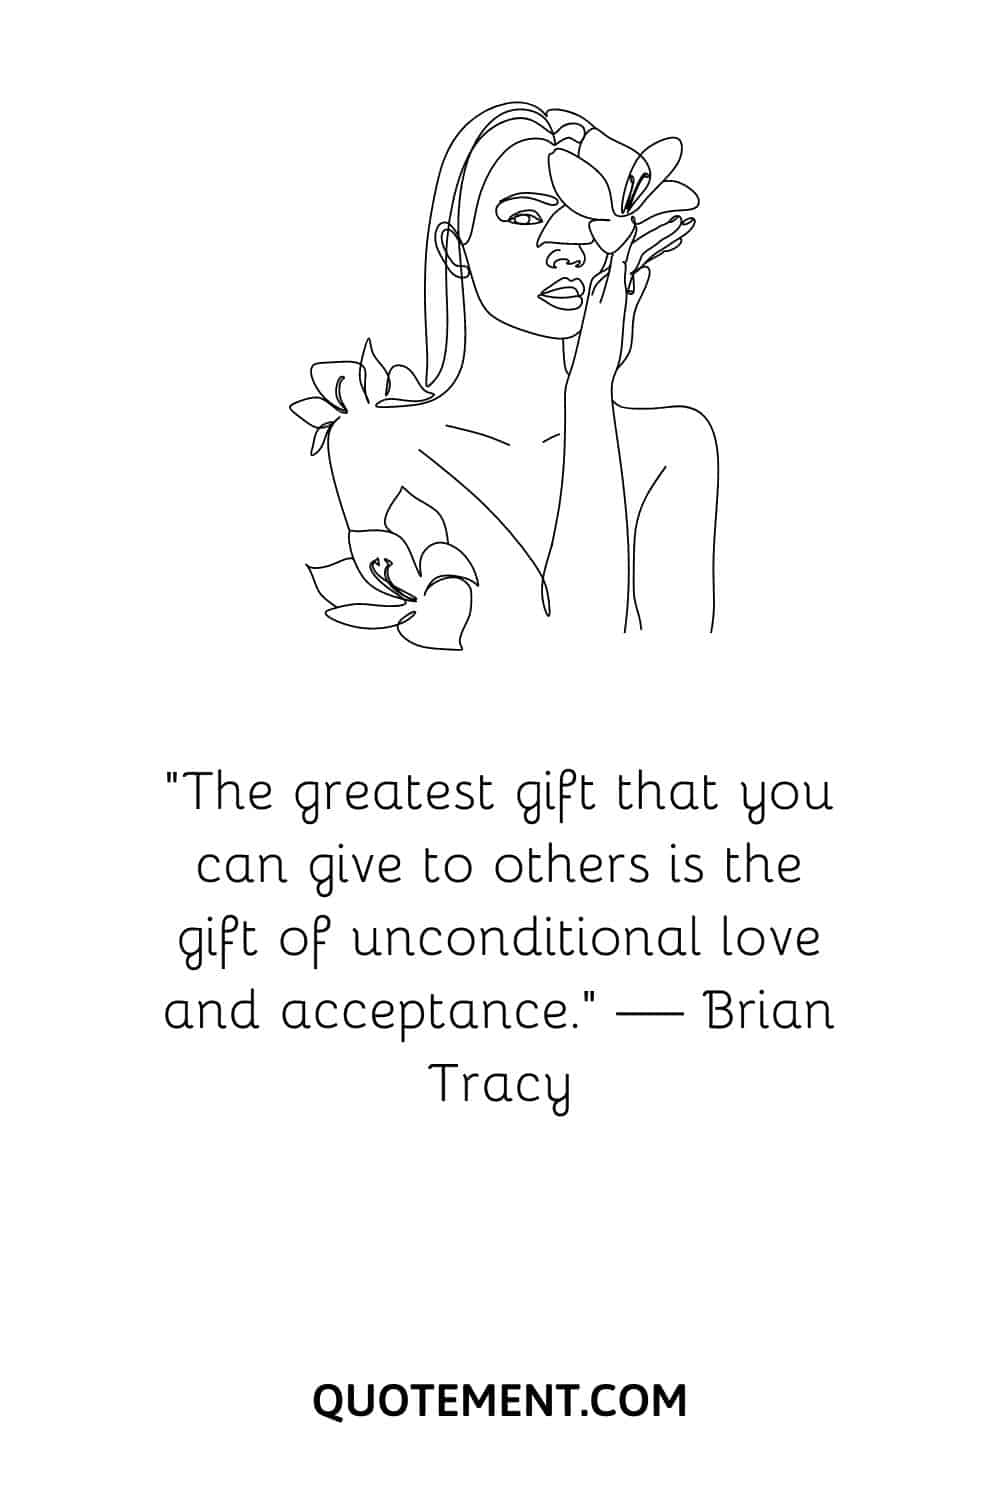 “The greatest gift that you can give to others is the gift of unconditional love and acceptance.” — Brian Tracy